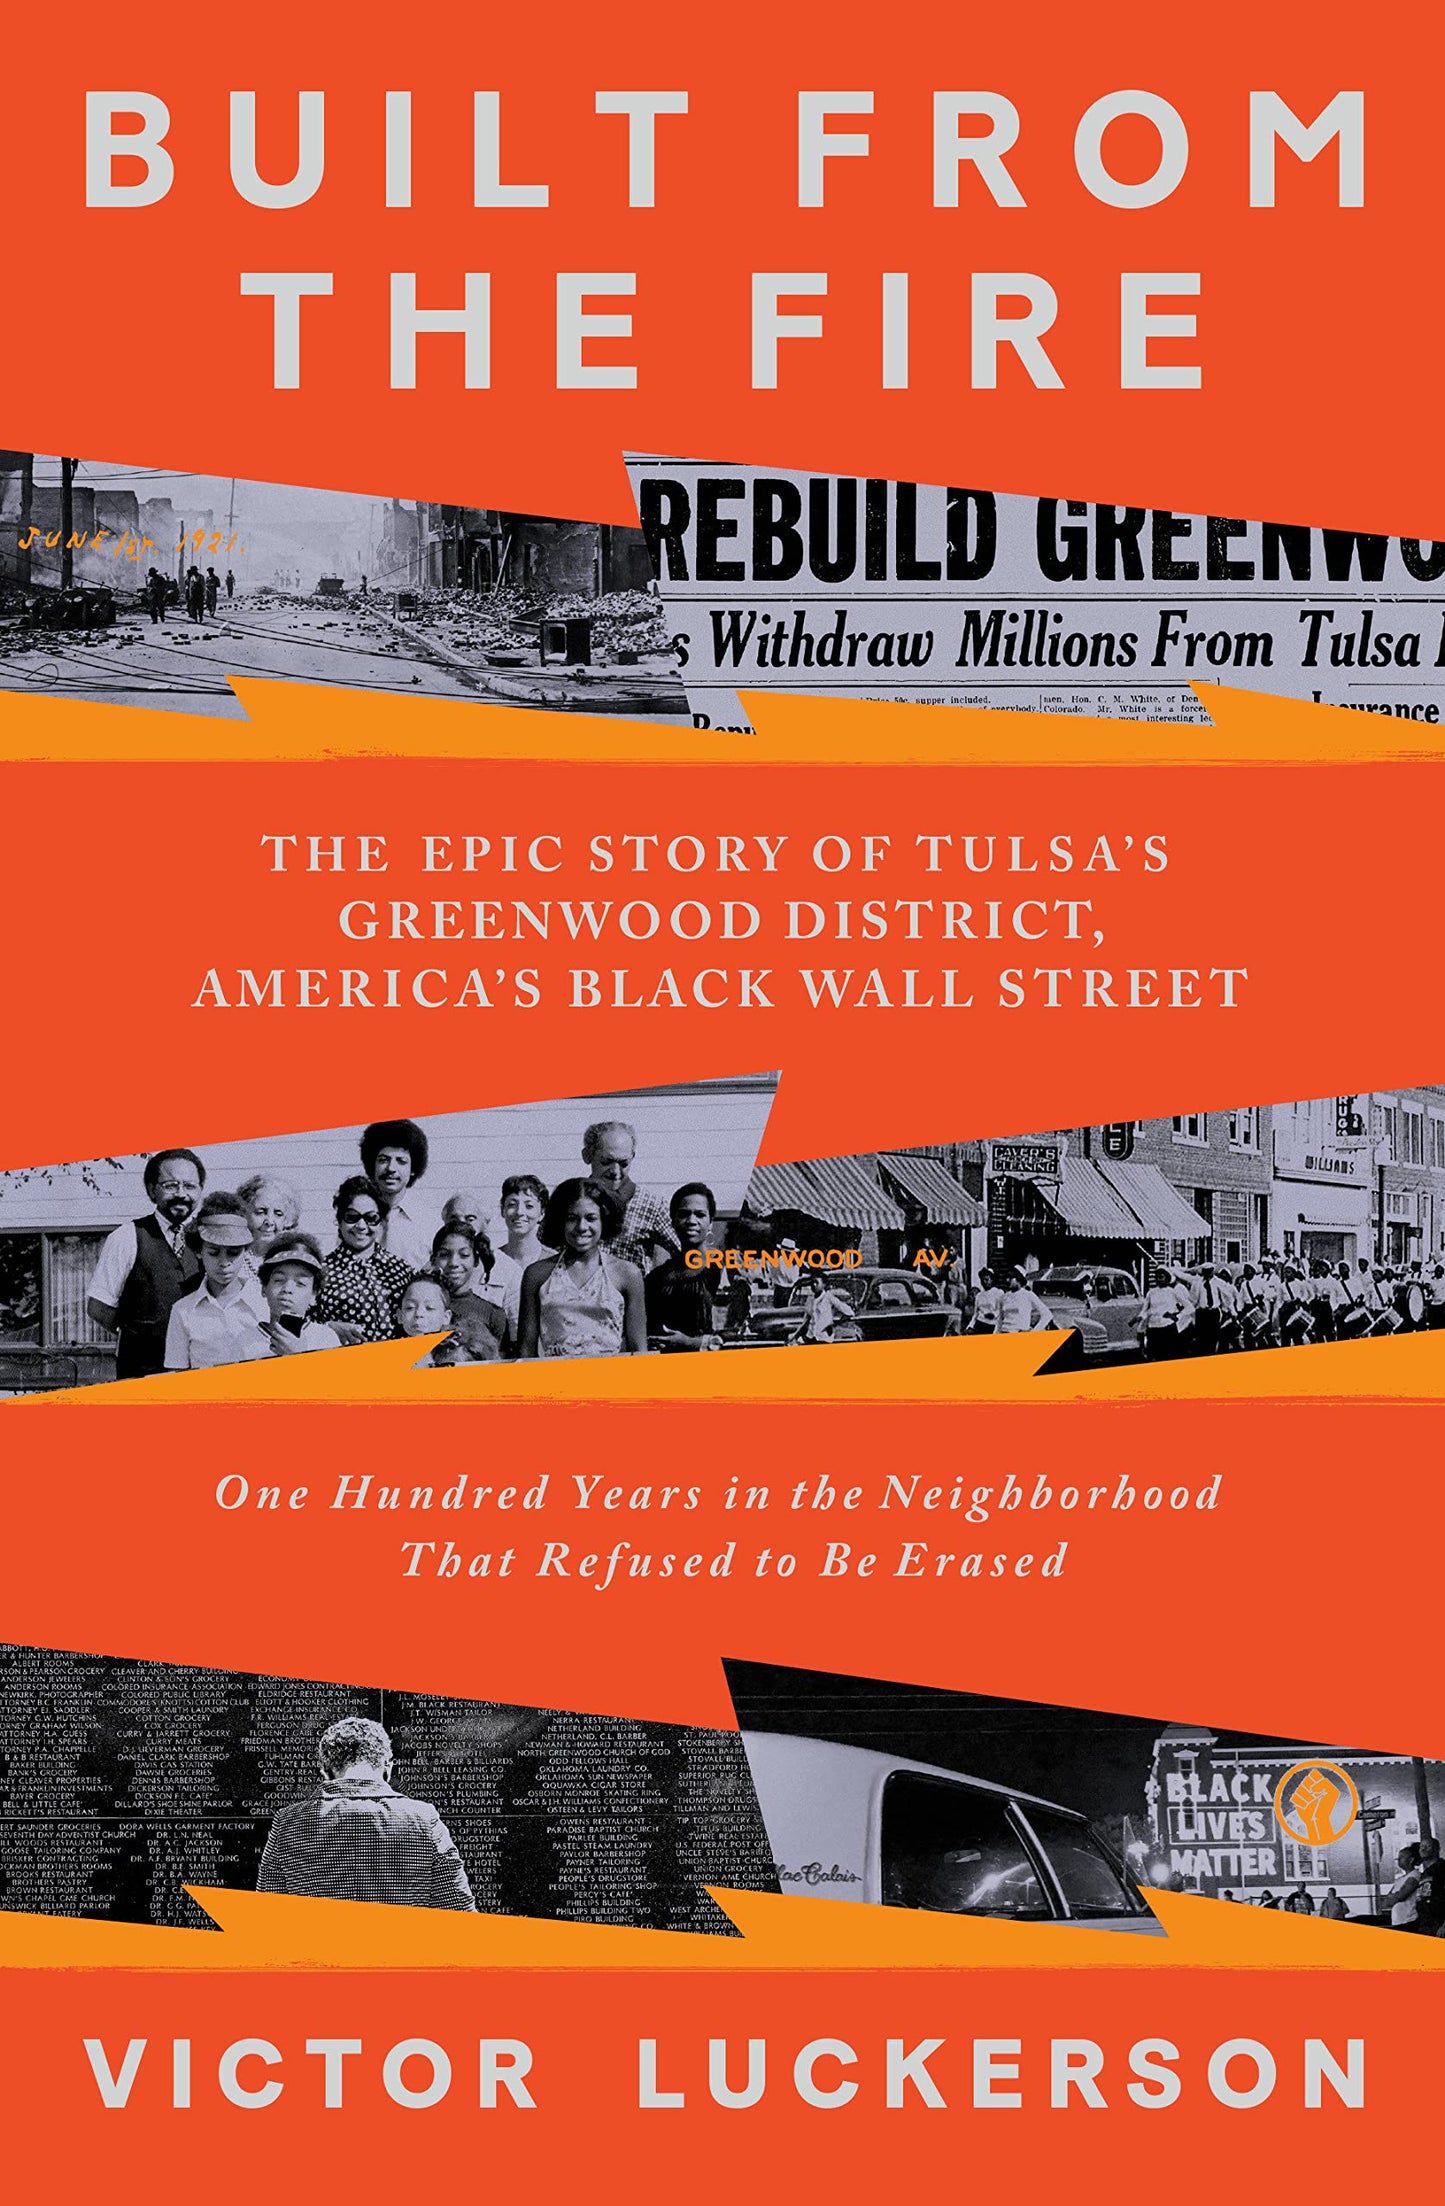 Built from the Fire // The Epic Story of Tulsa's Greenwood District, America's Black Wall Street